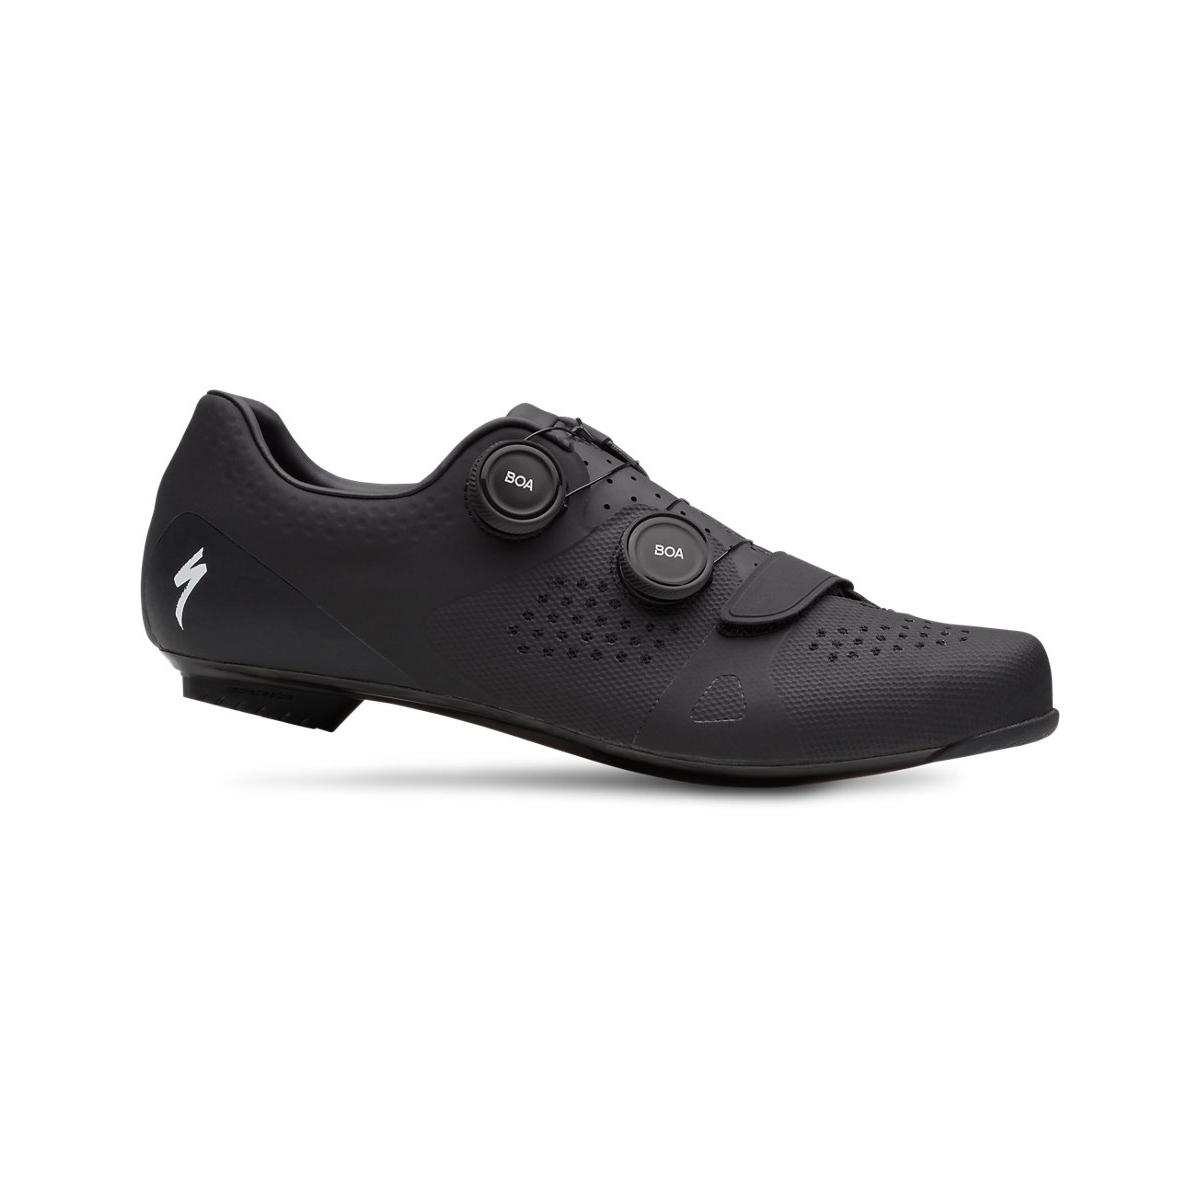 Buty Rowerowe SPECIALIZED Torch 3.0 - black